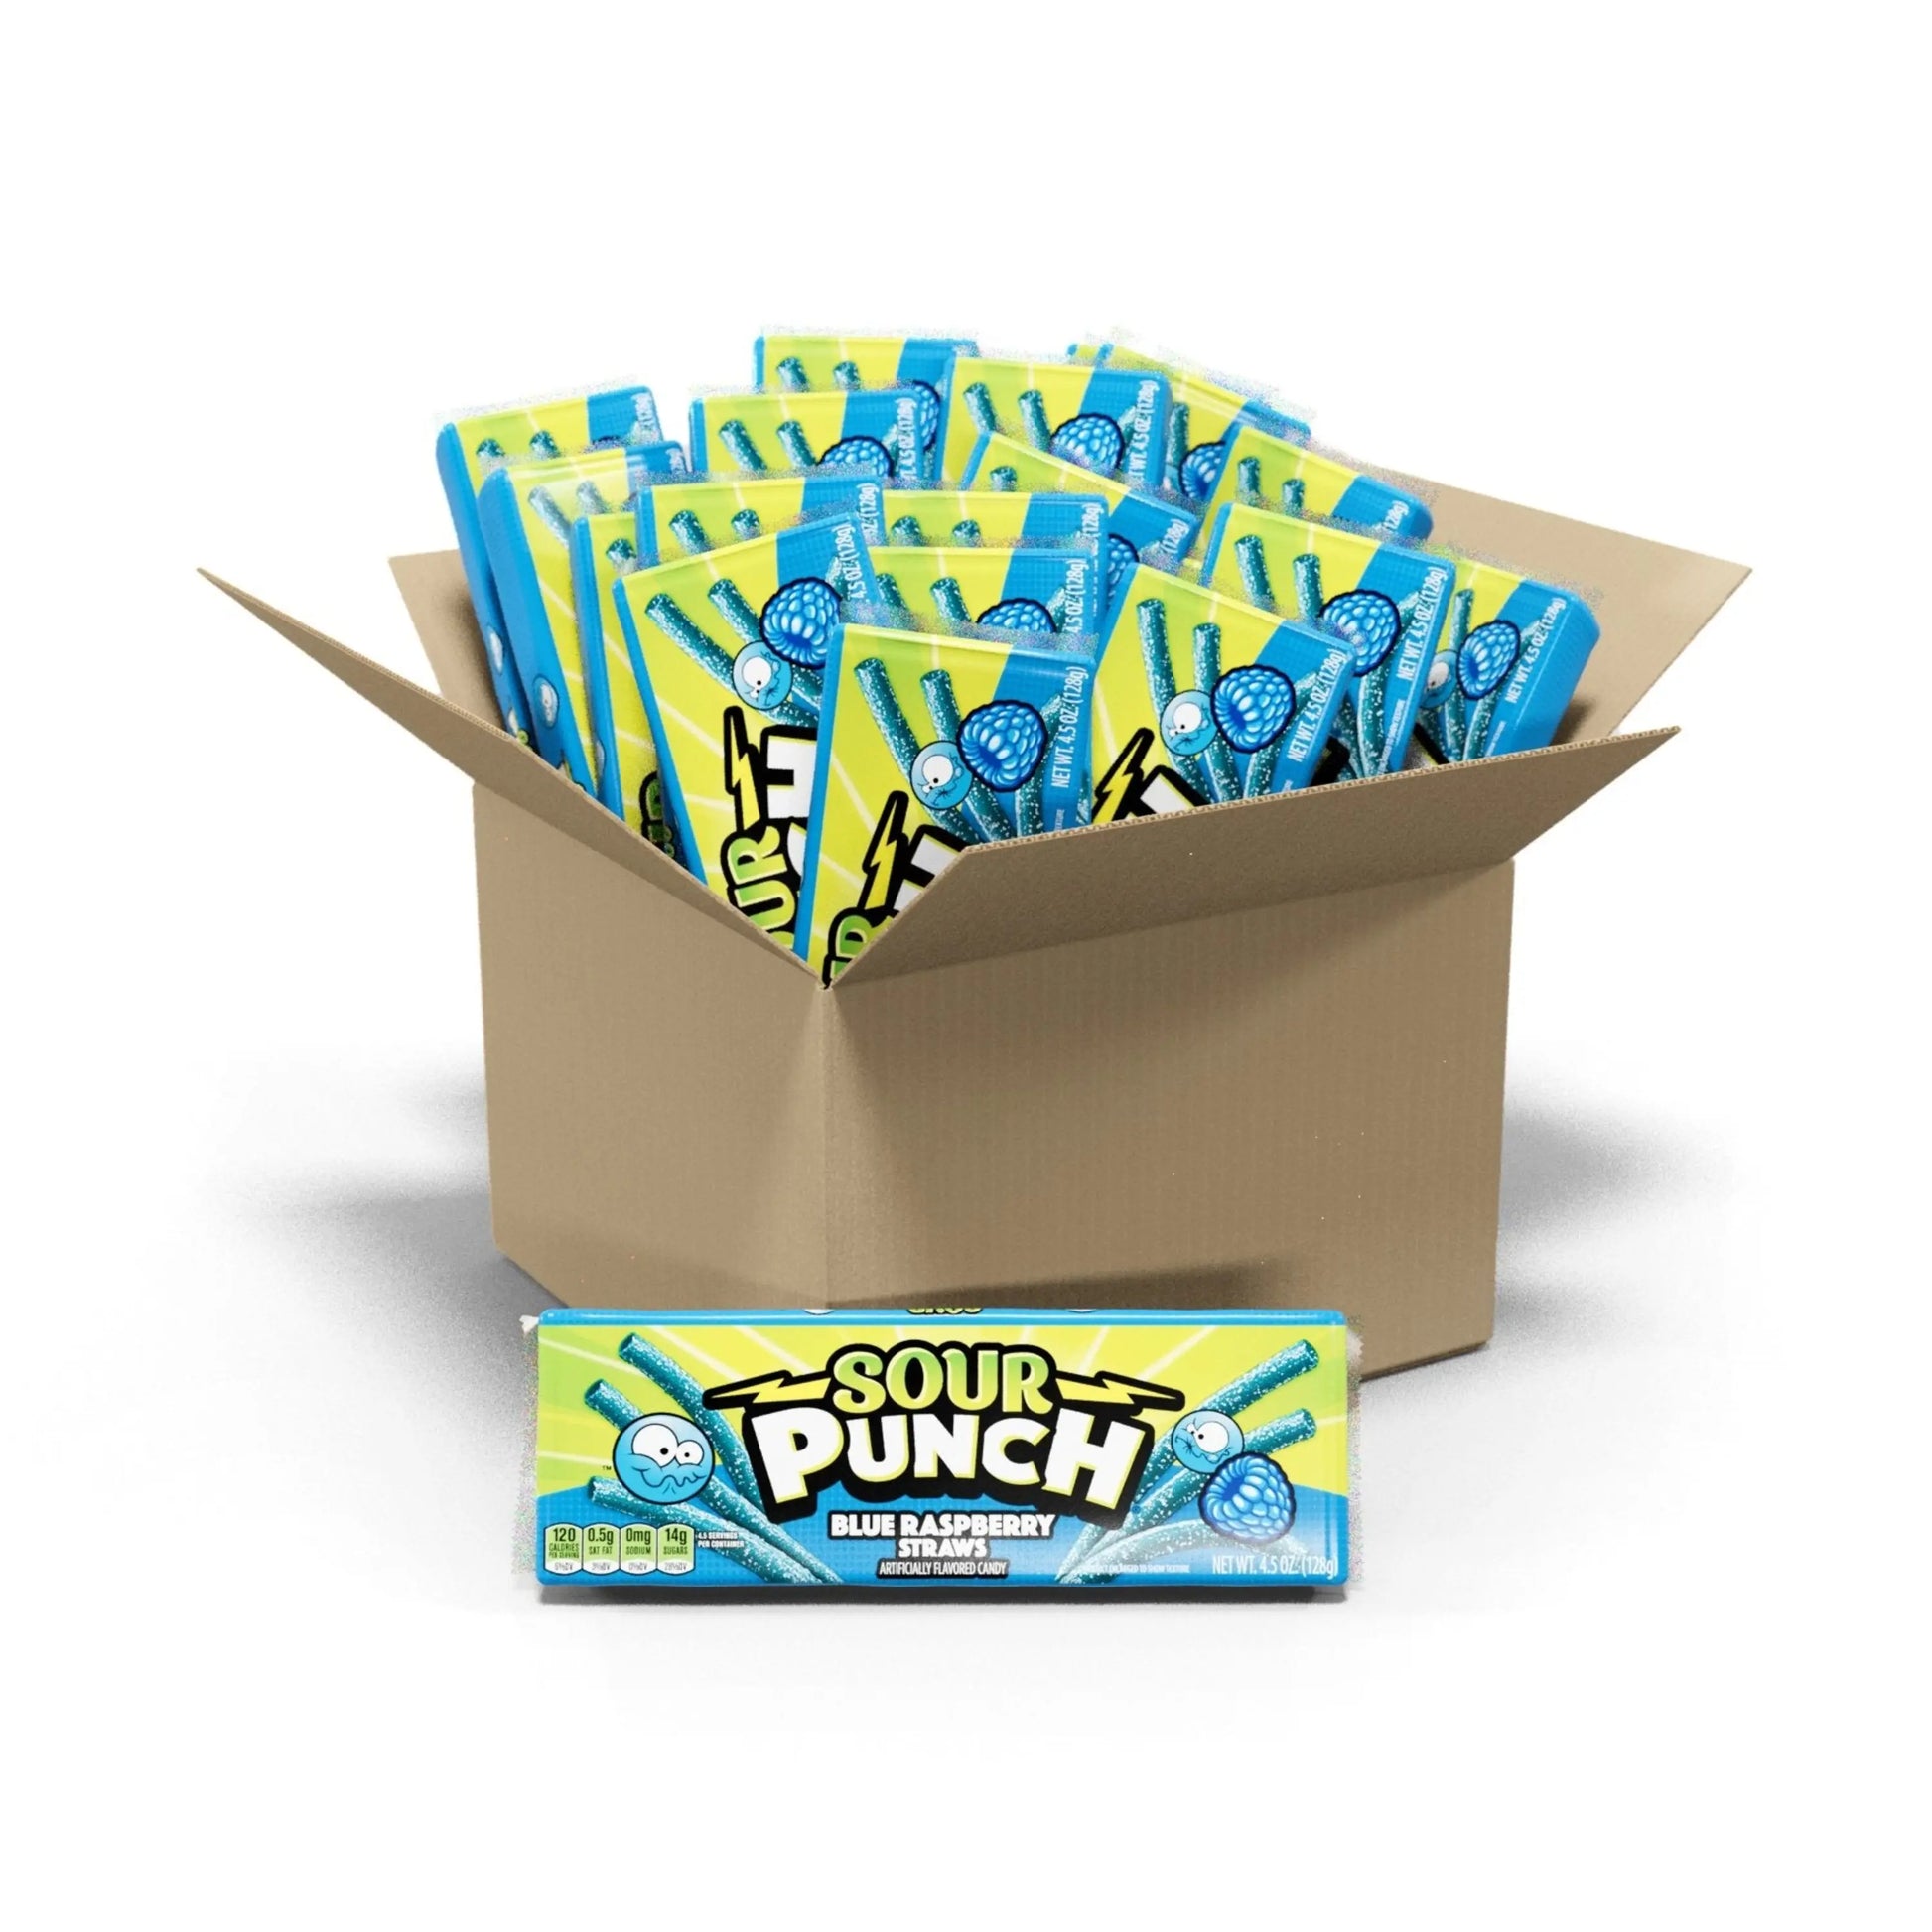 24 Count box of Sour Punch Blue Raspberry Straws Candy 4.5oz Trays